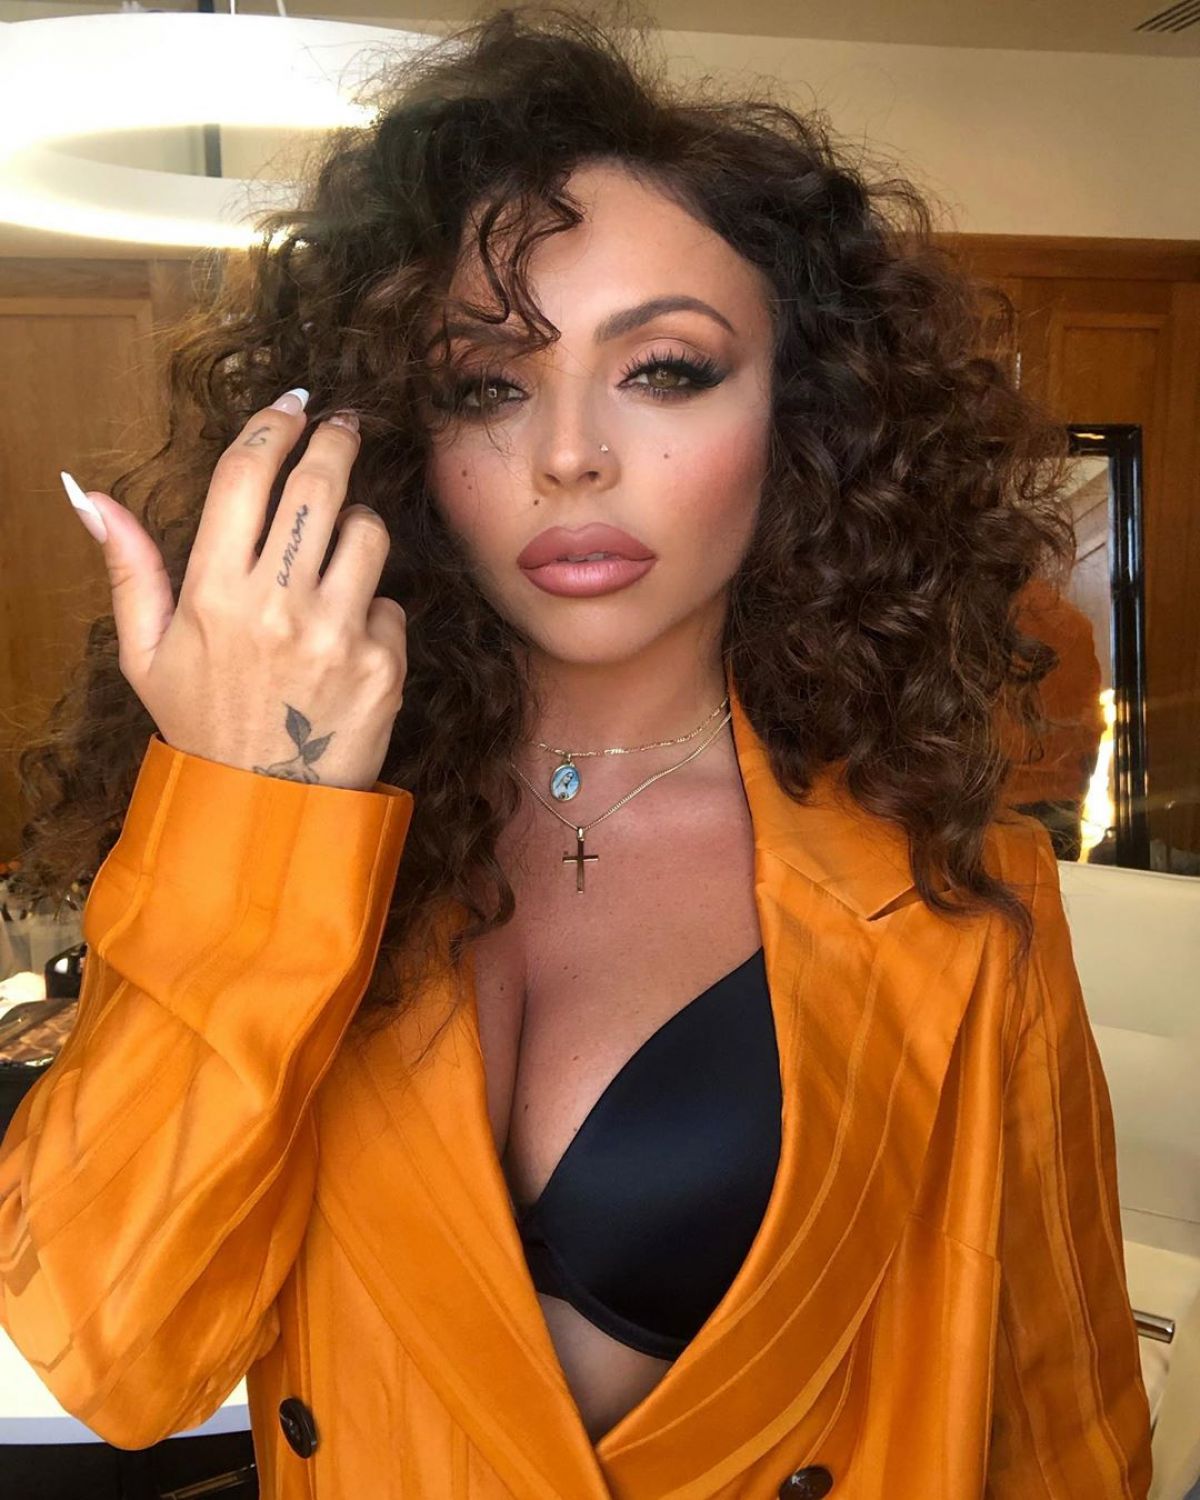 English Singer Jesy Nelson Shared in Instagram Photos 2020/10/25 1